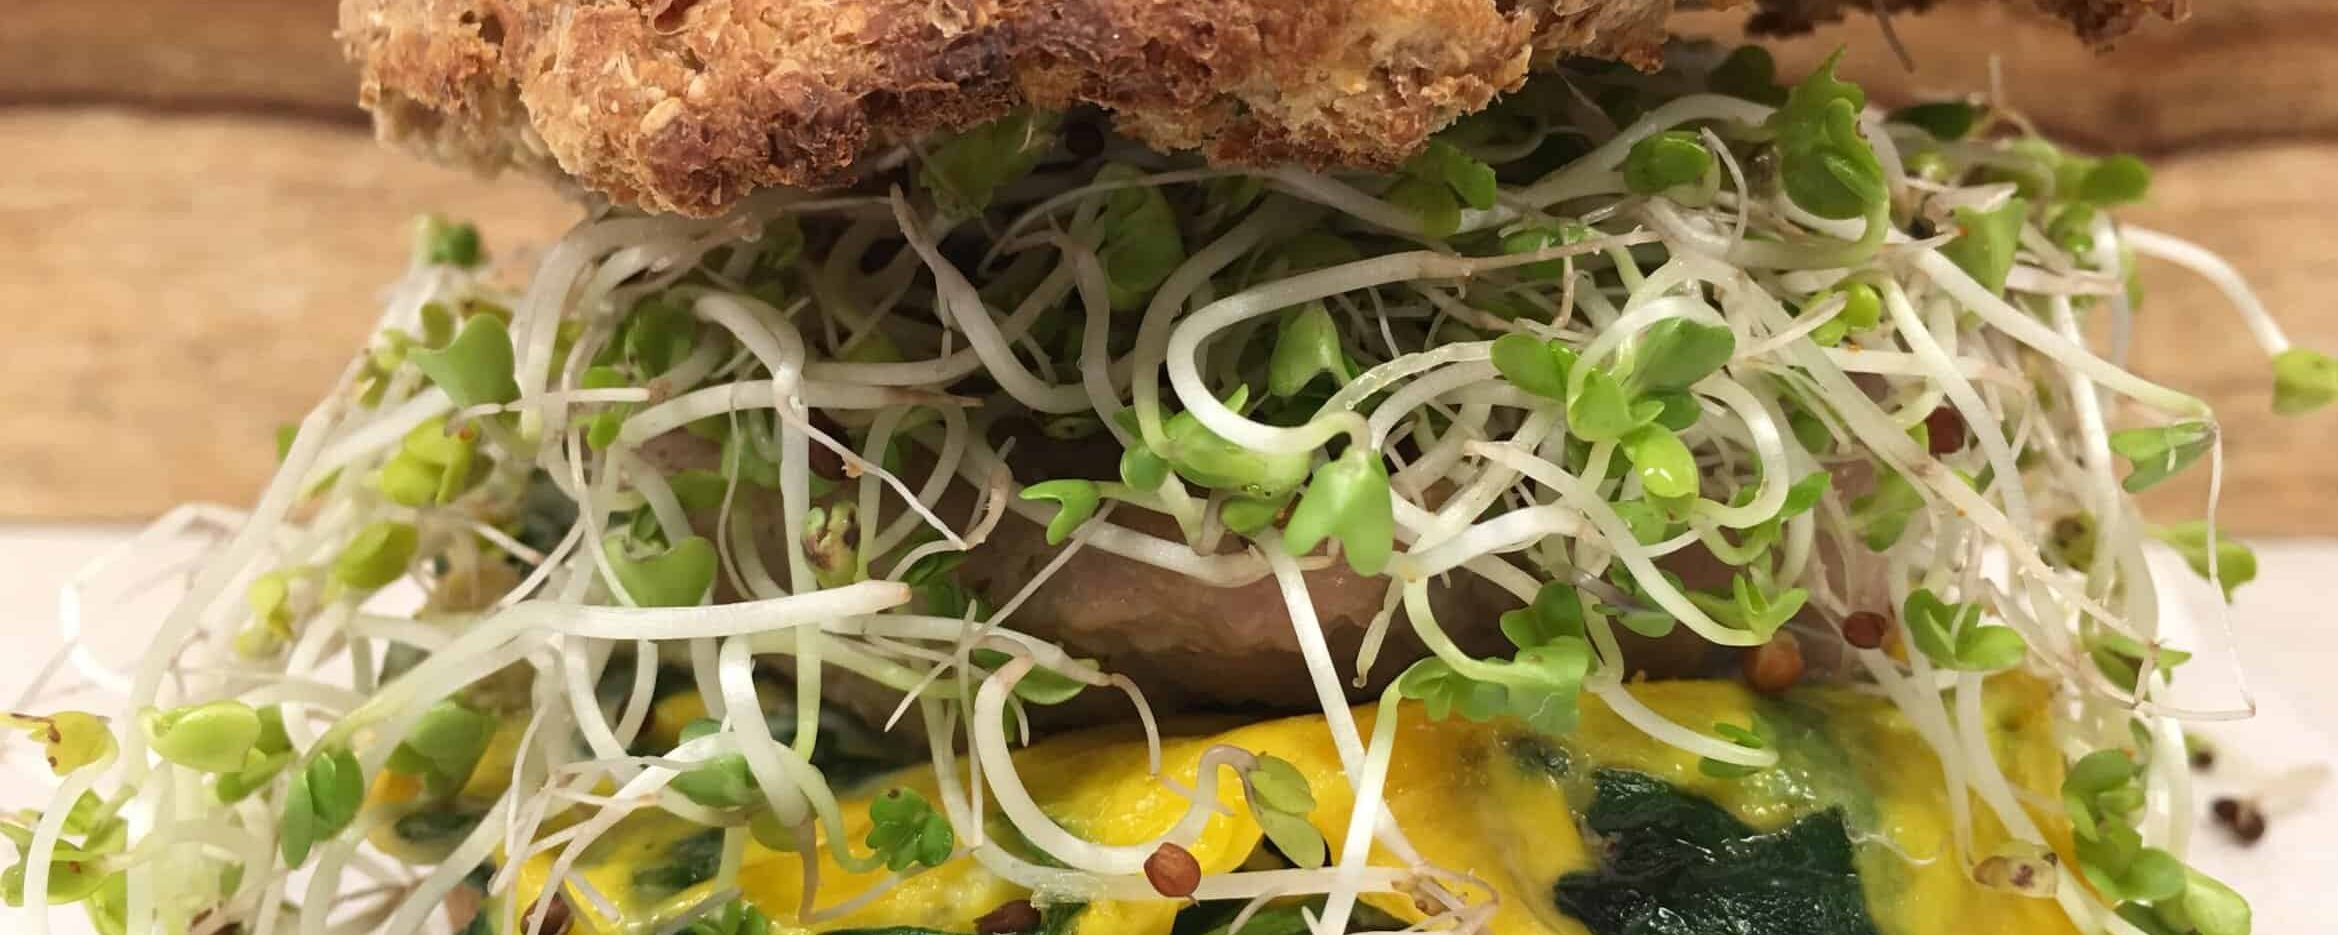 CARE Recipe: Sausage Breakfast Sandwich with Broccoli Sprouts